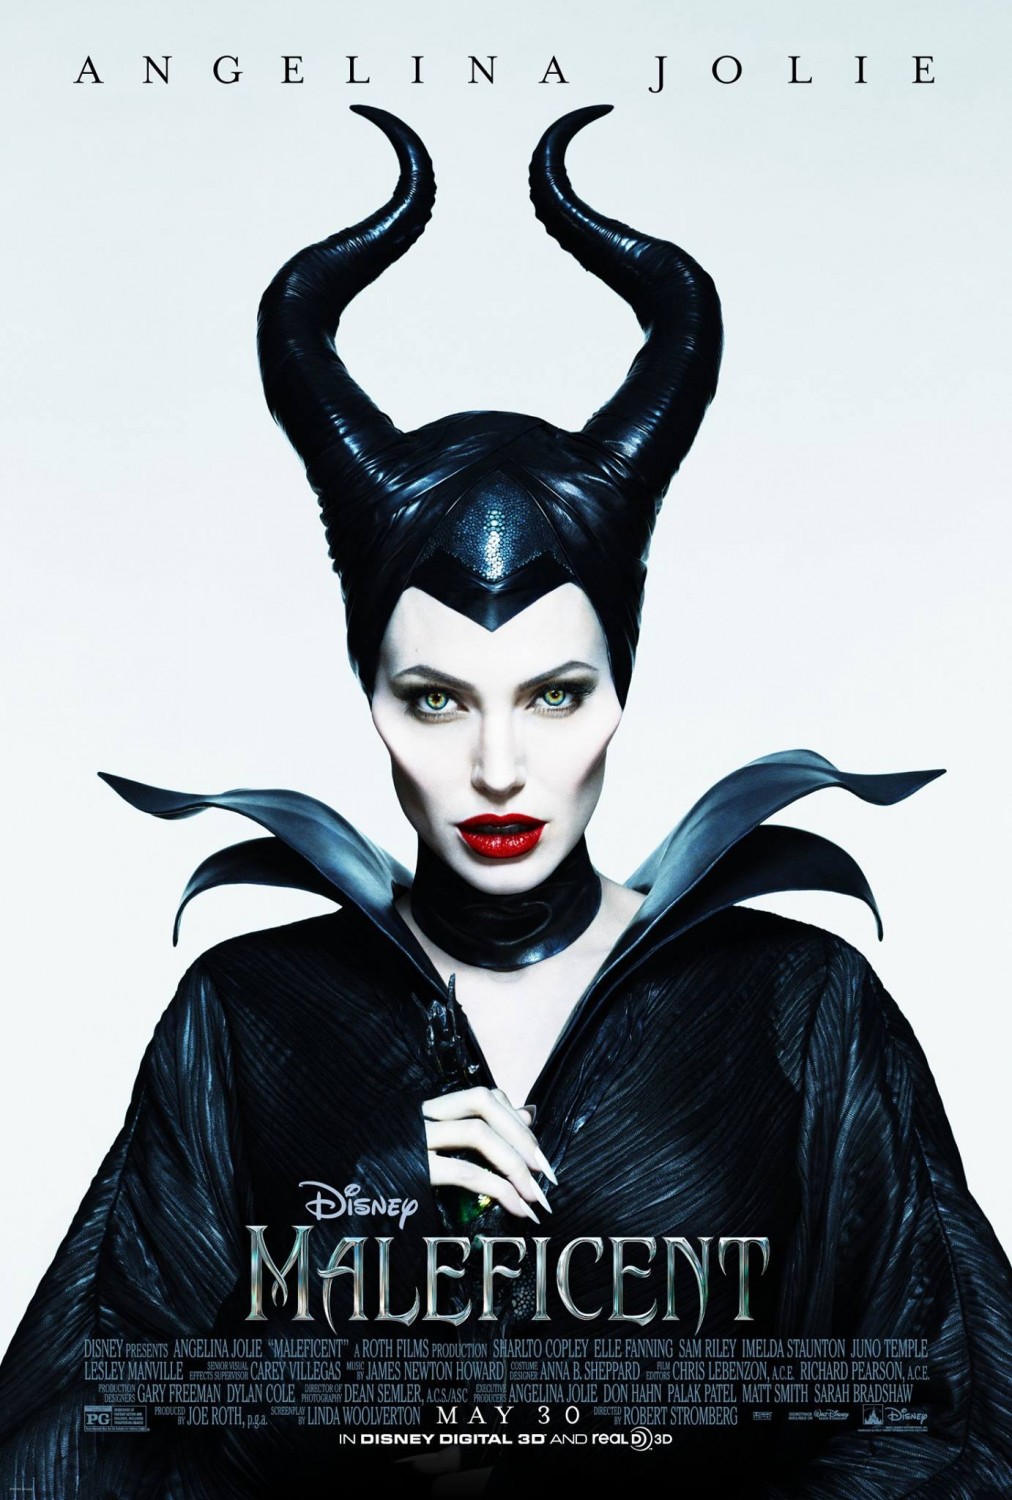 http://s6.picofile.com/file/8209298468/maleficent_ver2_xlg.jpg